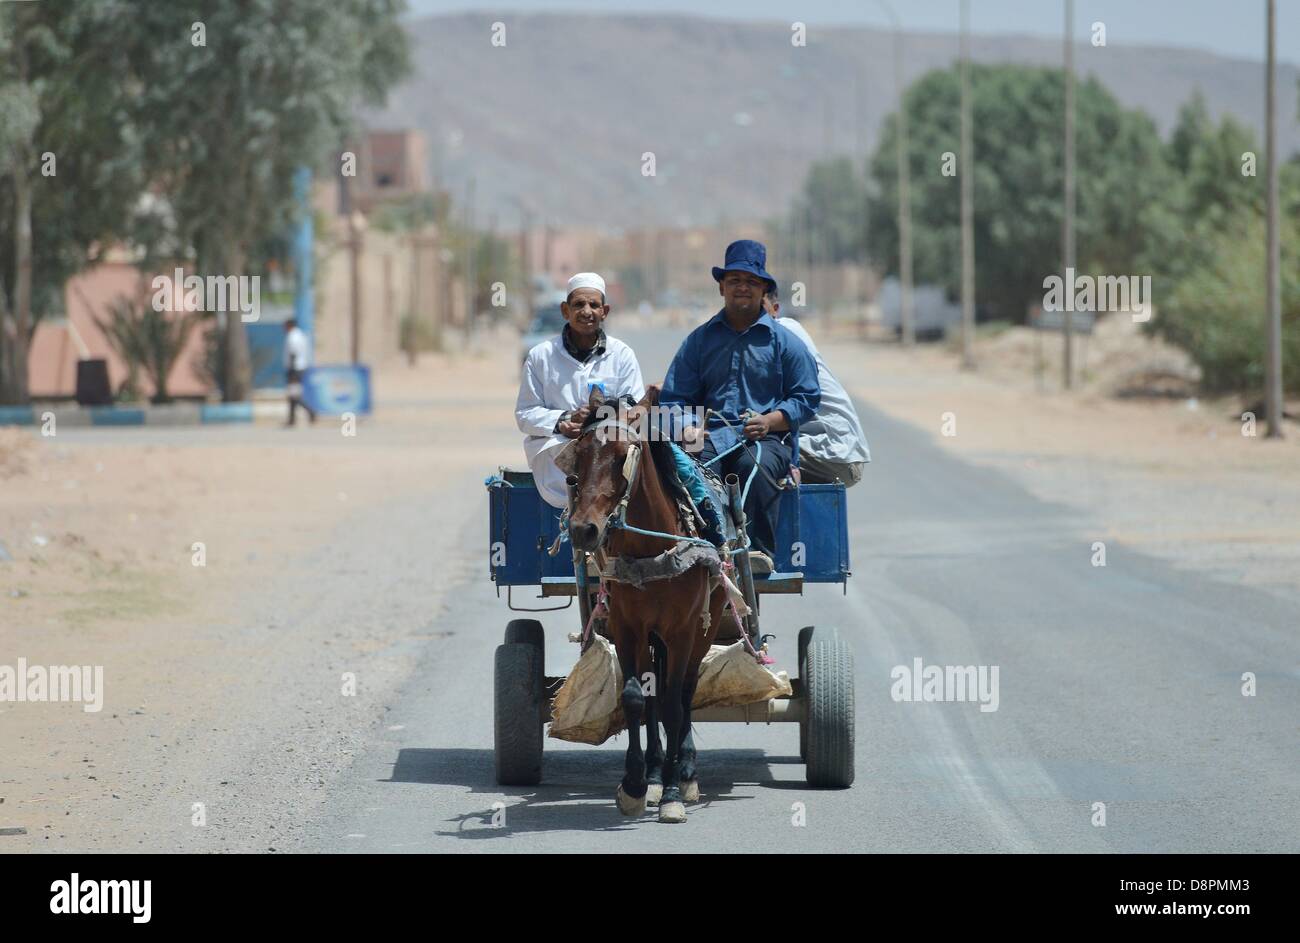 Street scene in  Morocco, North Africa, Africa. Photo: Frank May Stock Photo